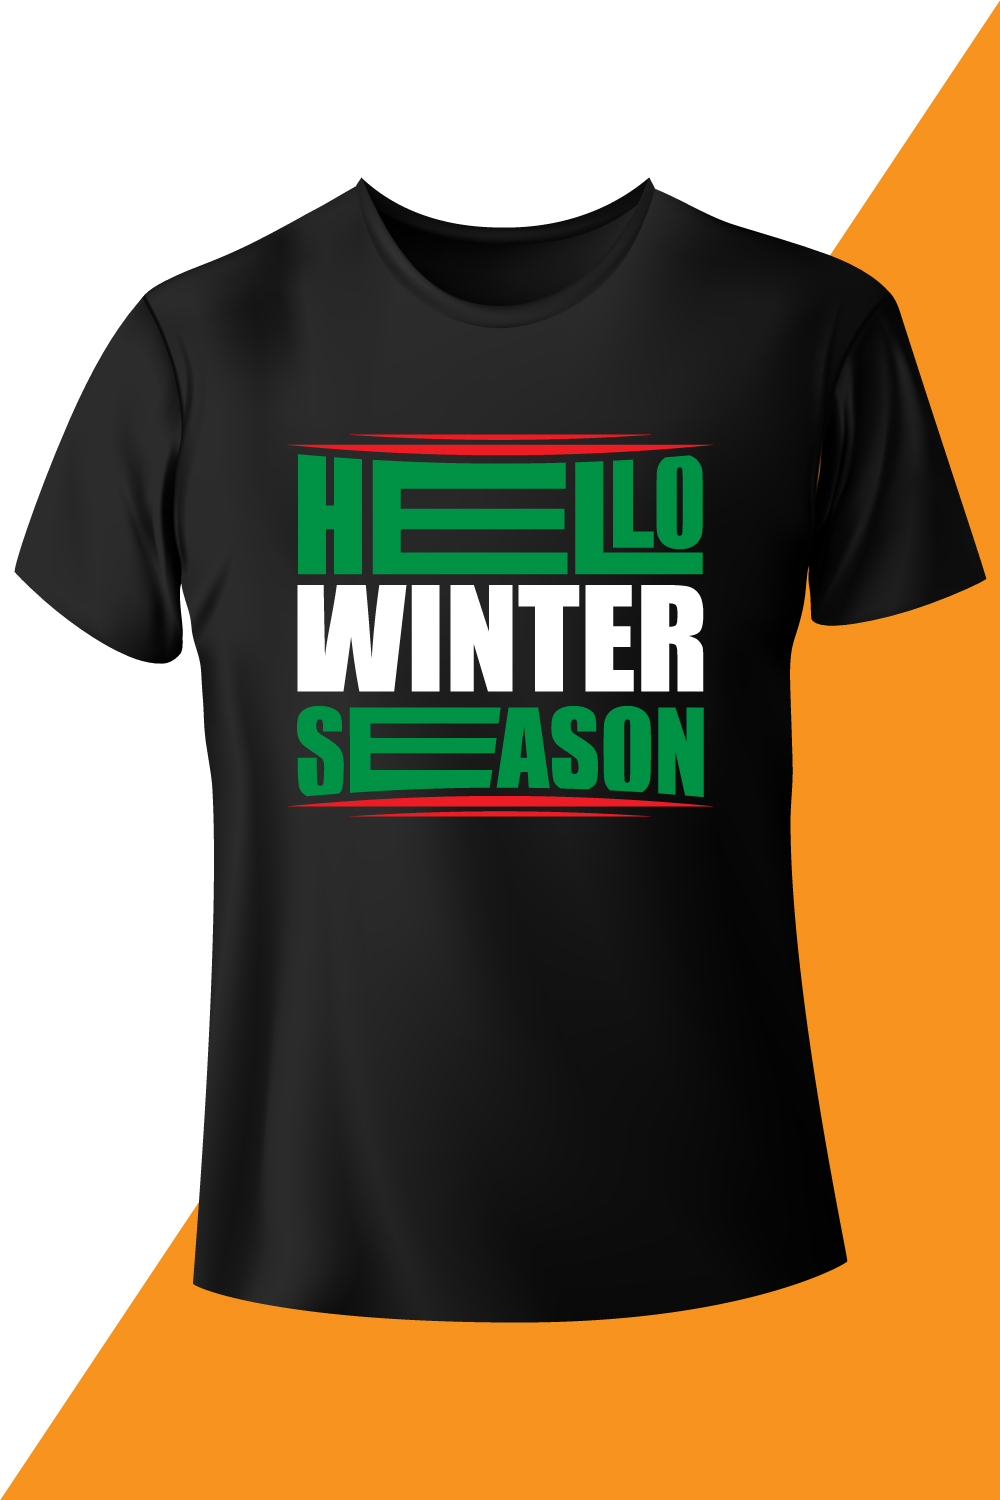 Image from a black t-shirt with a beautiful inscription hello winter season.